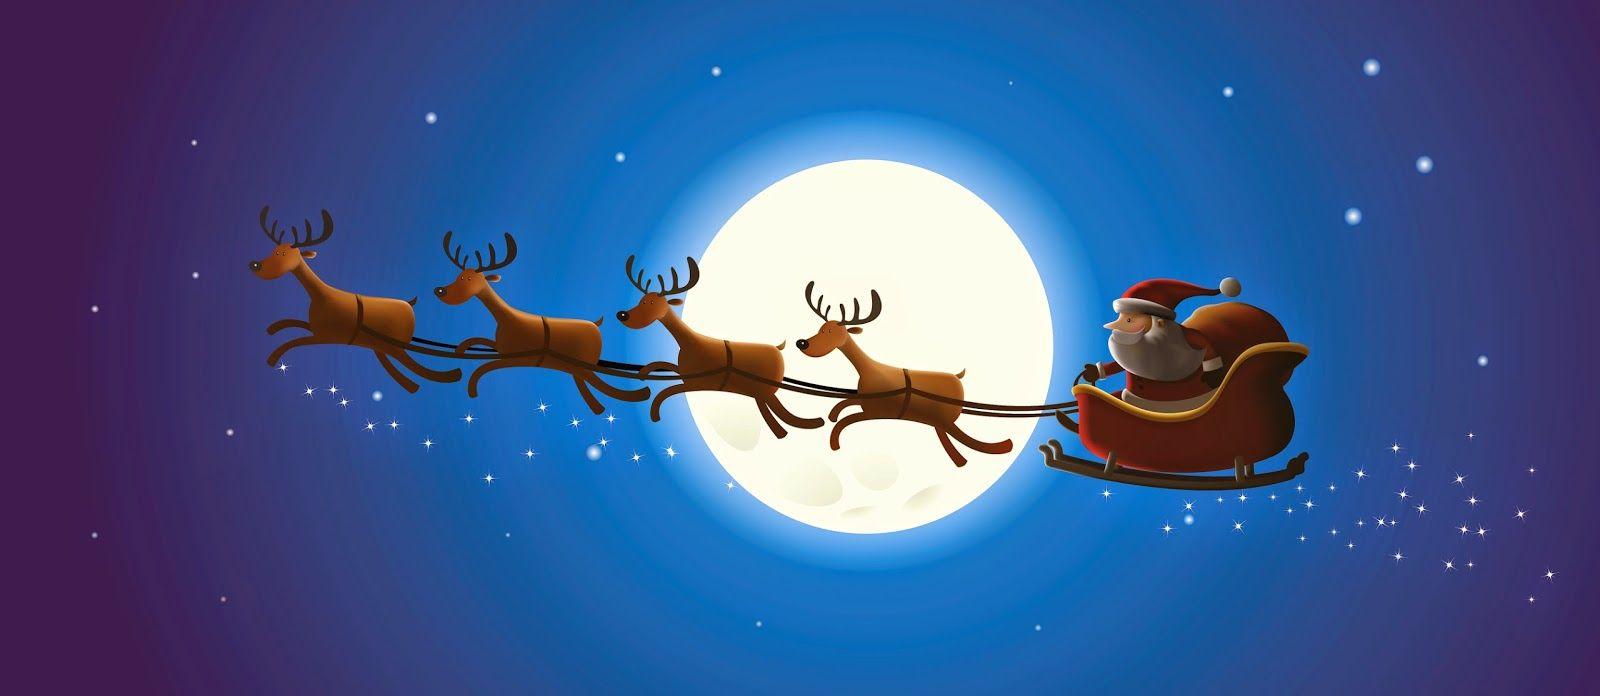 Collection of Santa Claus Sleigh Drawing. High quality, free